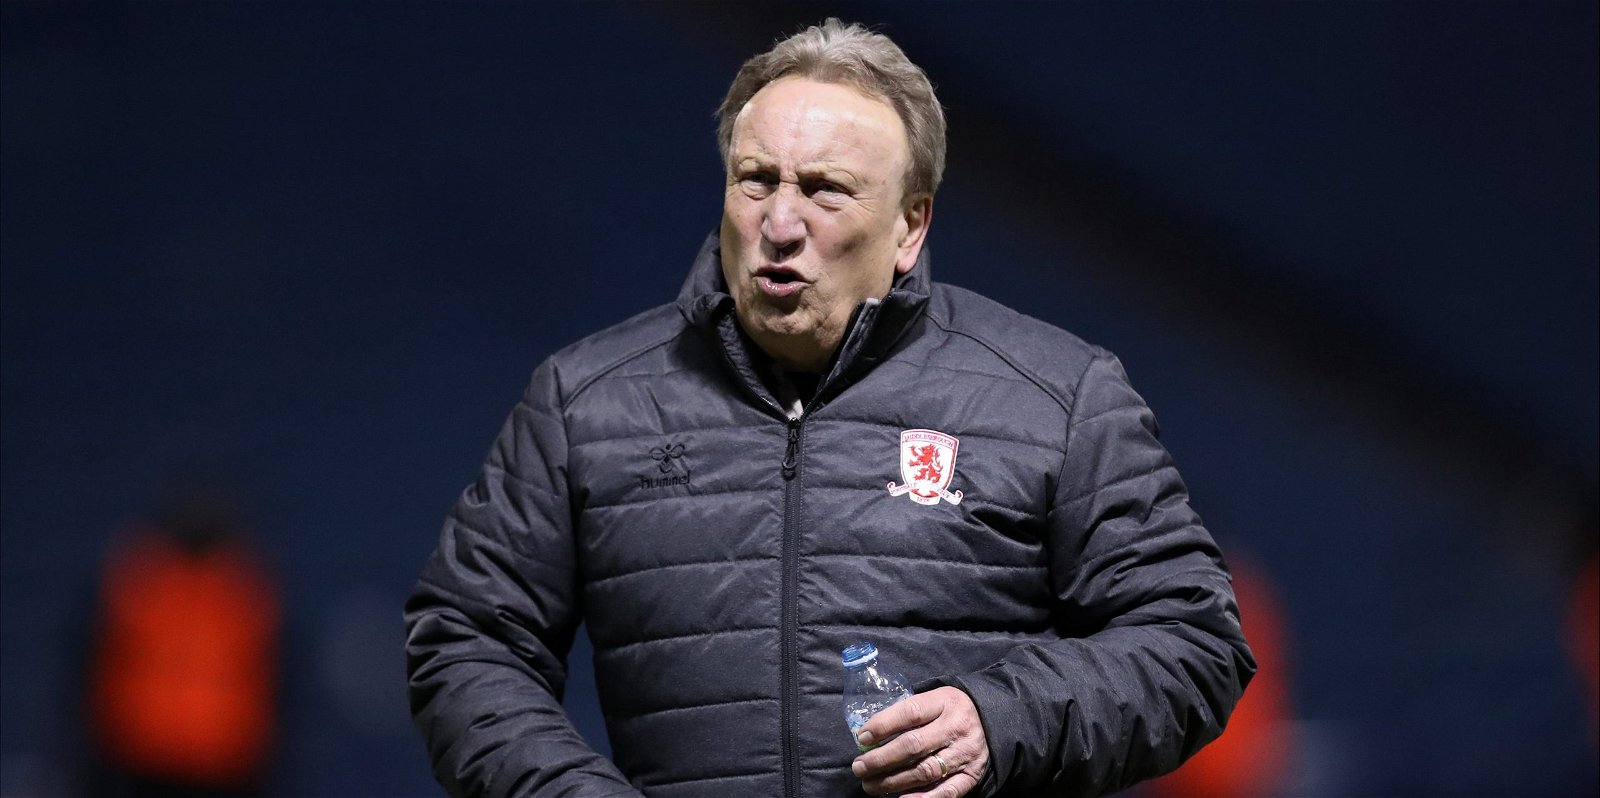 MIddlesbrough, &#8216;I’ve just got this feeling&#8217; &#8211; Neil Warnock offers verdict on Middlesbrough and Sheffield United ahead of crunch match